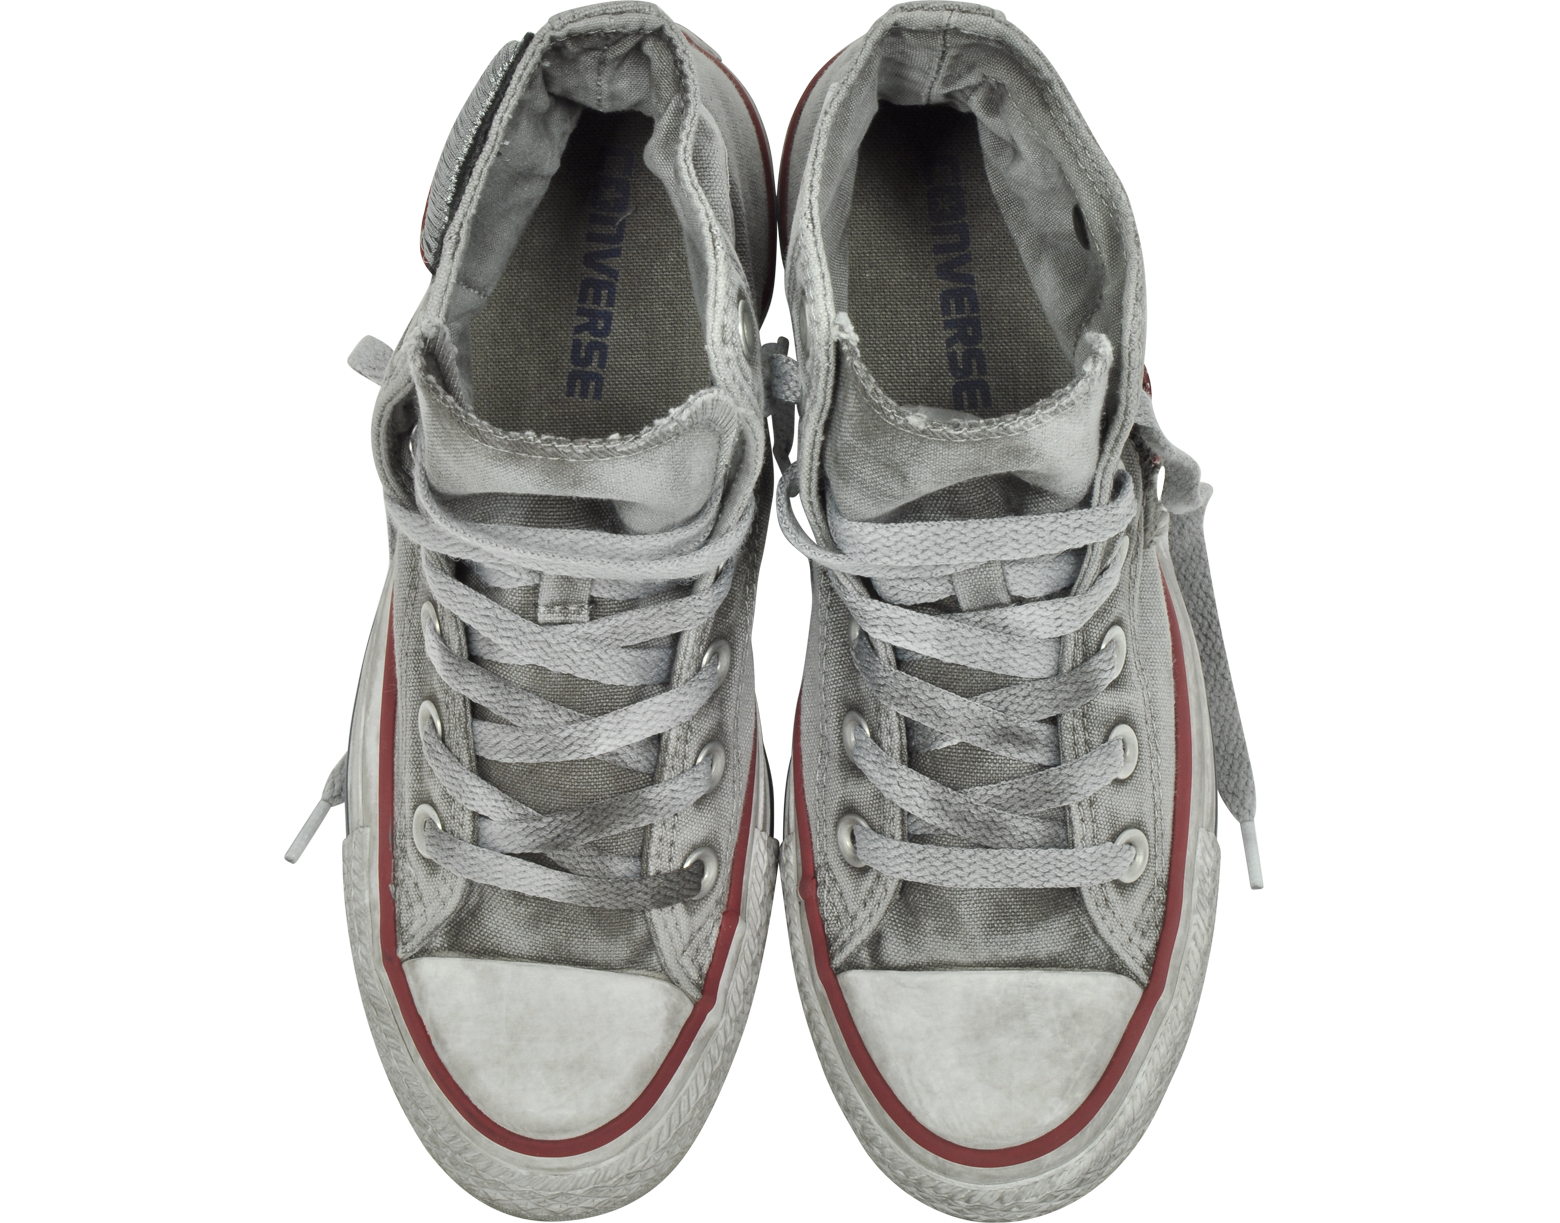 converse chuck taylor all star vintage limited edition